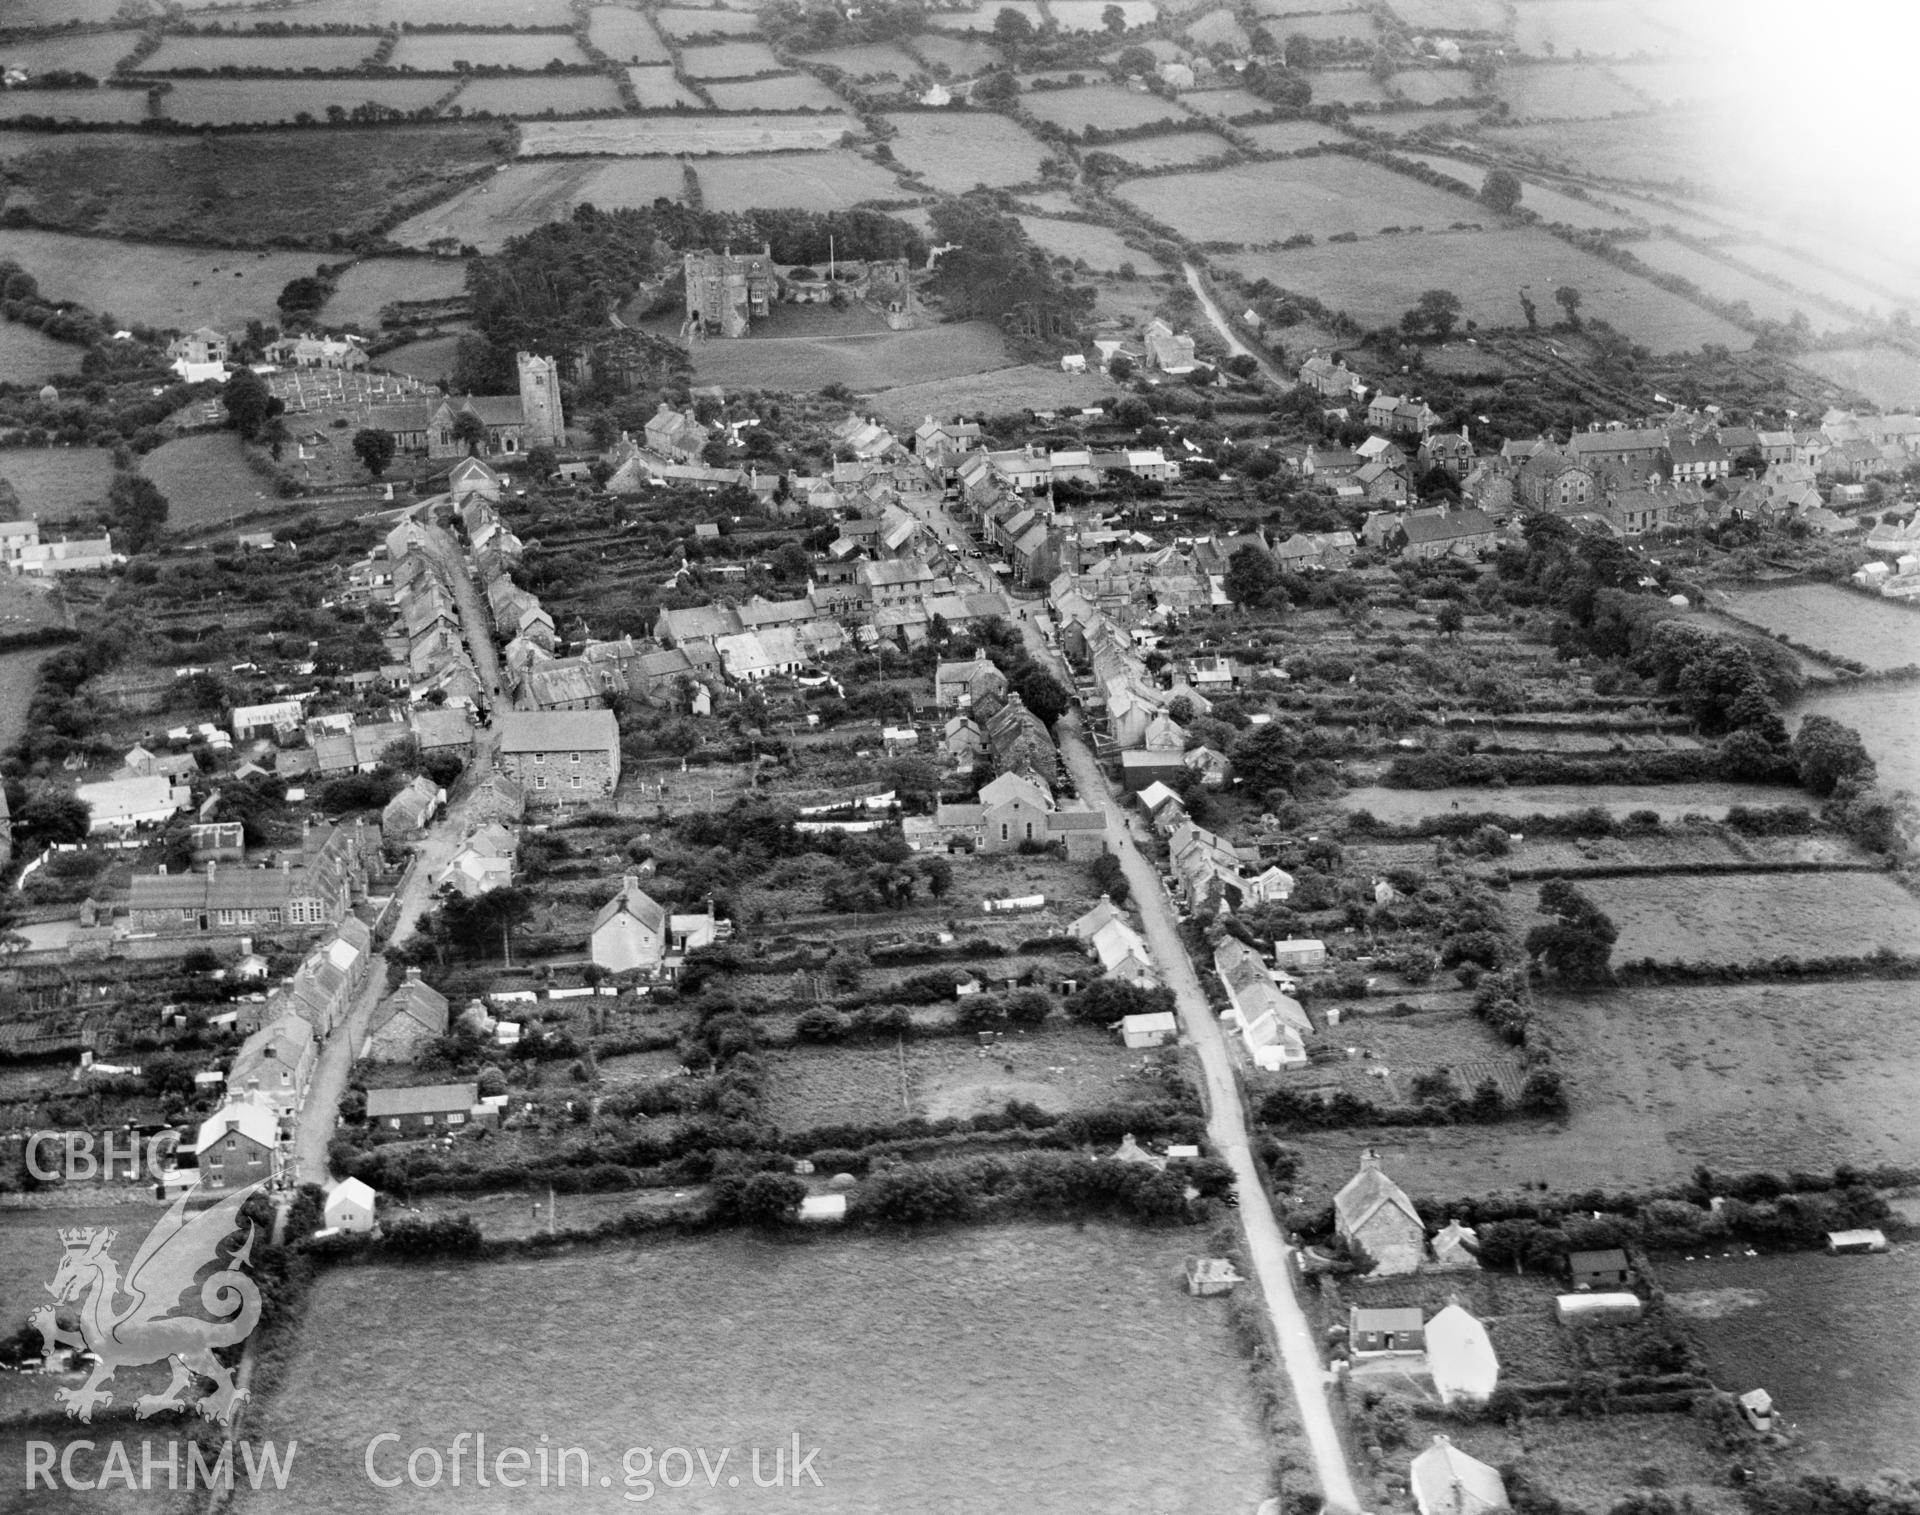 General view of Newport, Pembrokeshire, oblique aerial view. 5?x4? black and white glass plate negative.